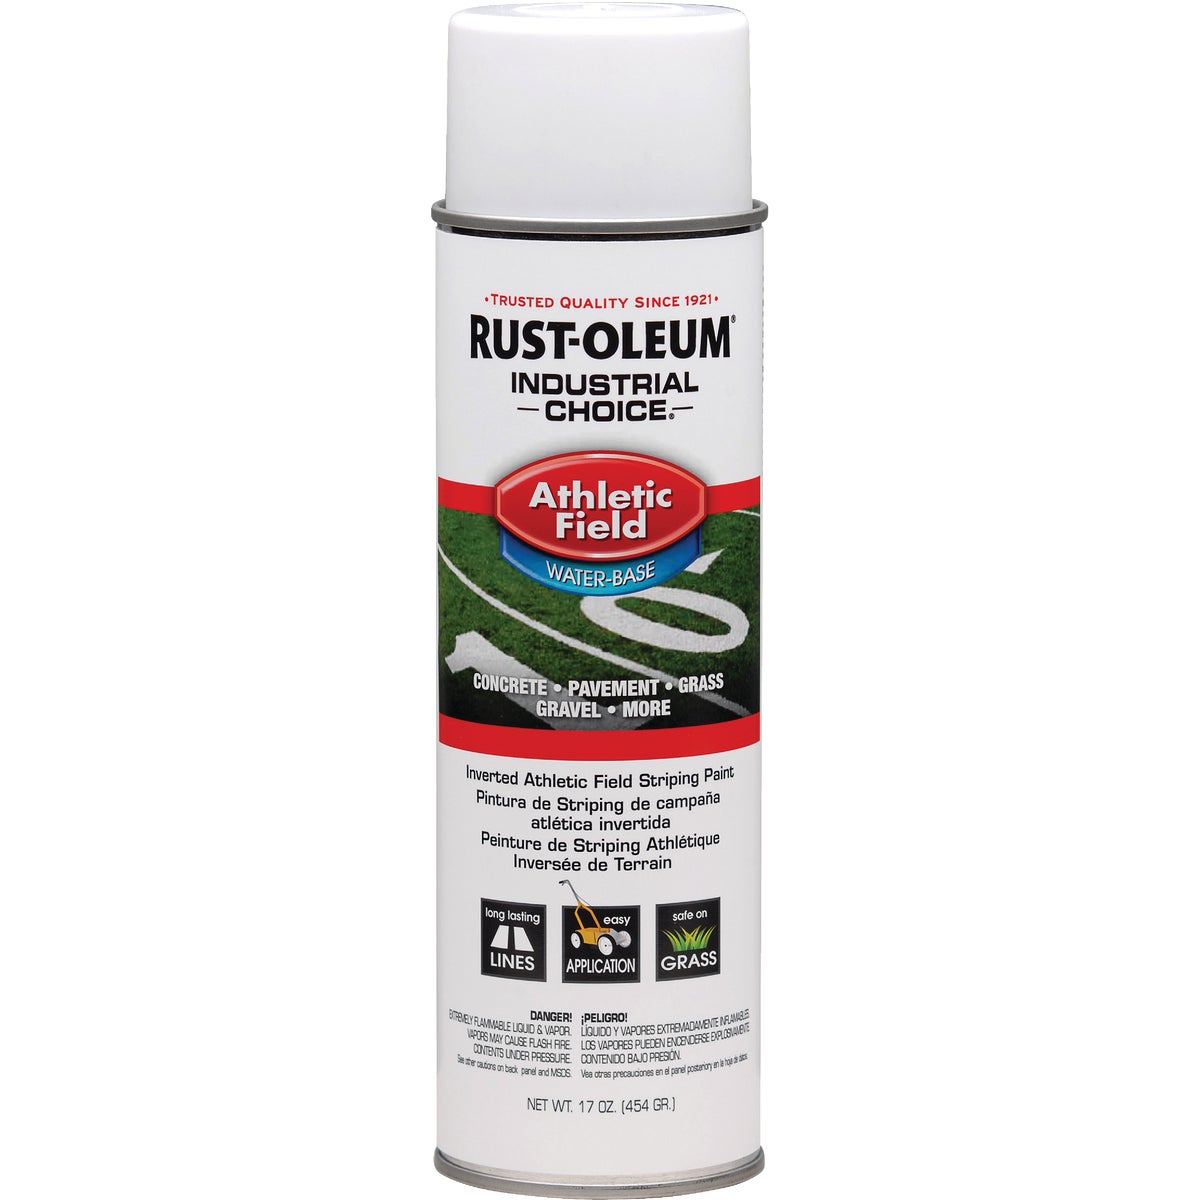 Rust-Oleum Industrial Choice White 17 Oz. Field Striping Paint 